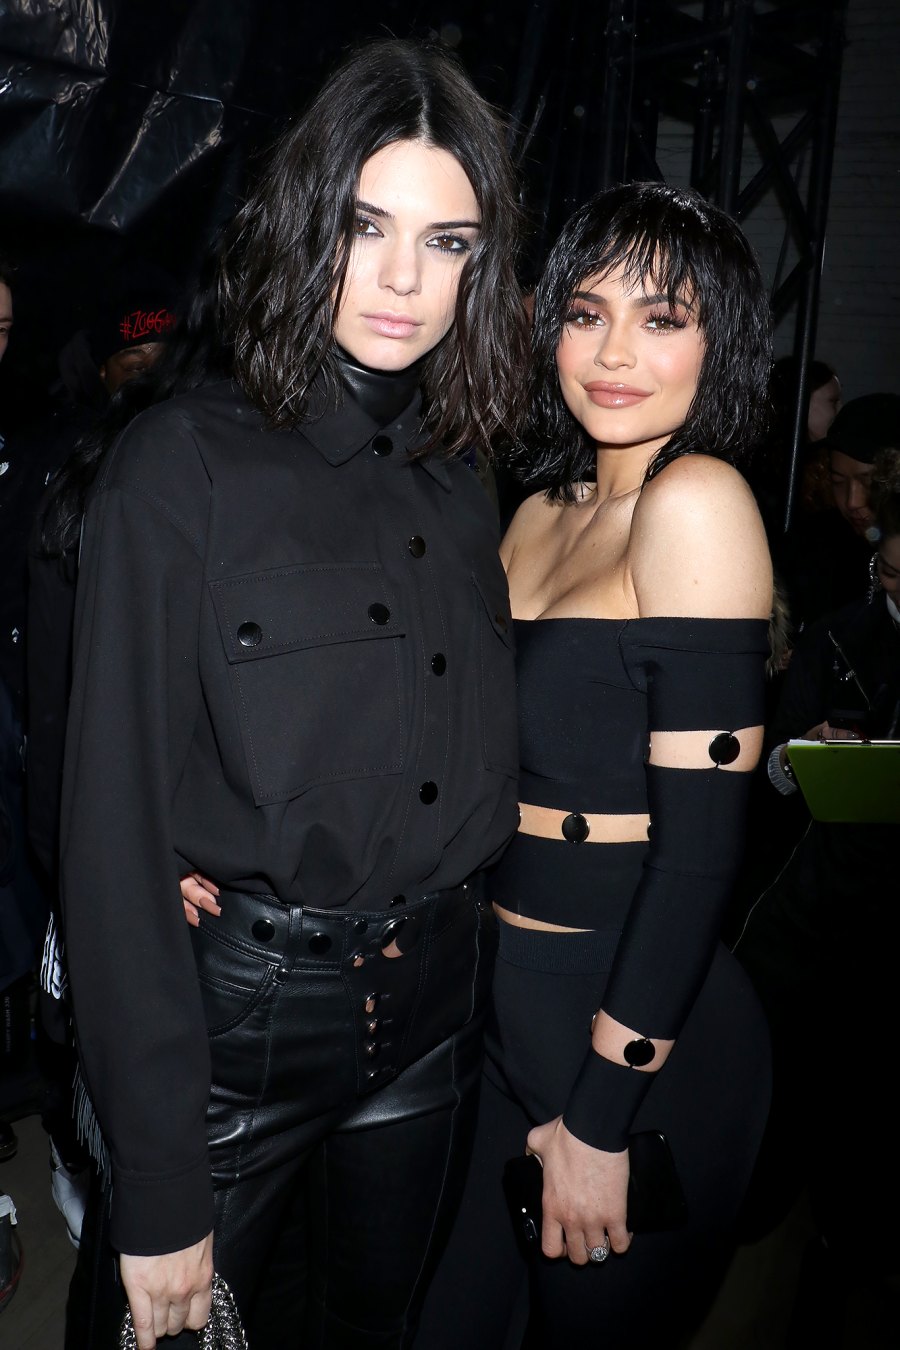 Kendall and Kylie Jenner Stars Who Have Attended Hillsong Church Justin Bieber, Hailey Bieber, Selena Gomez and More